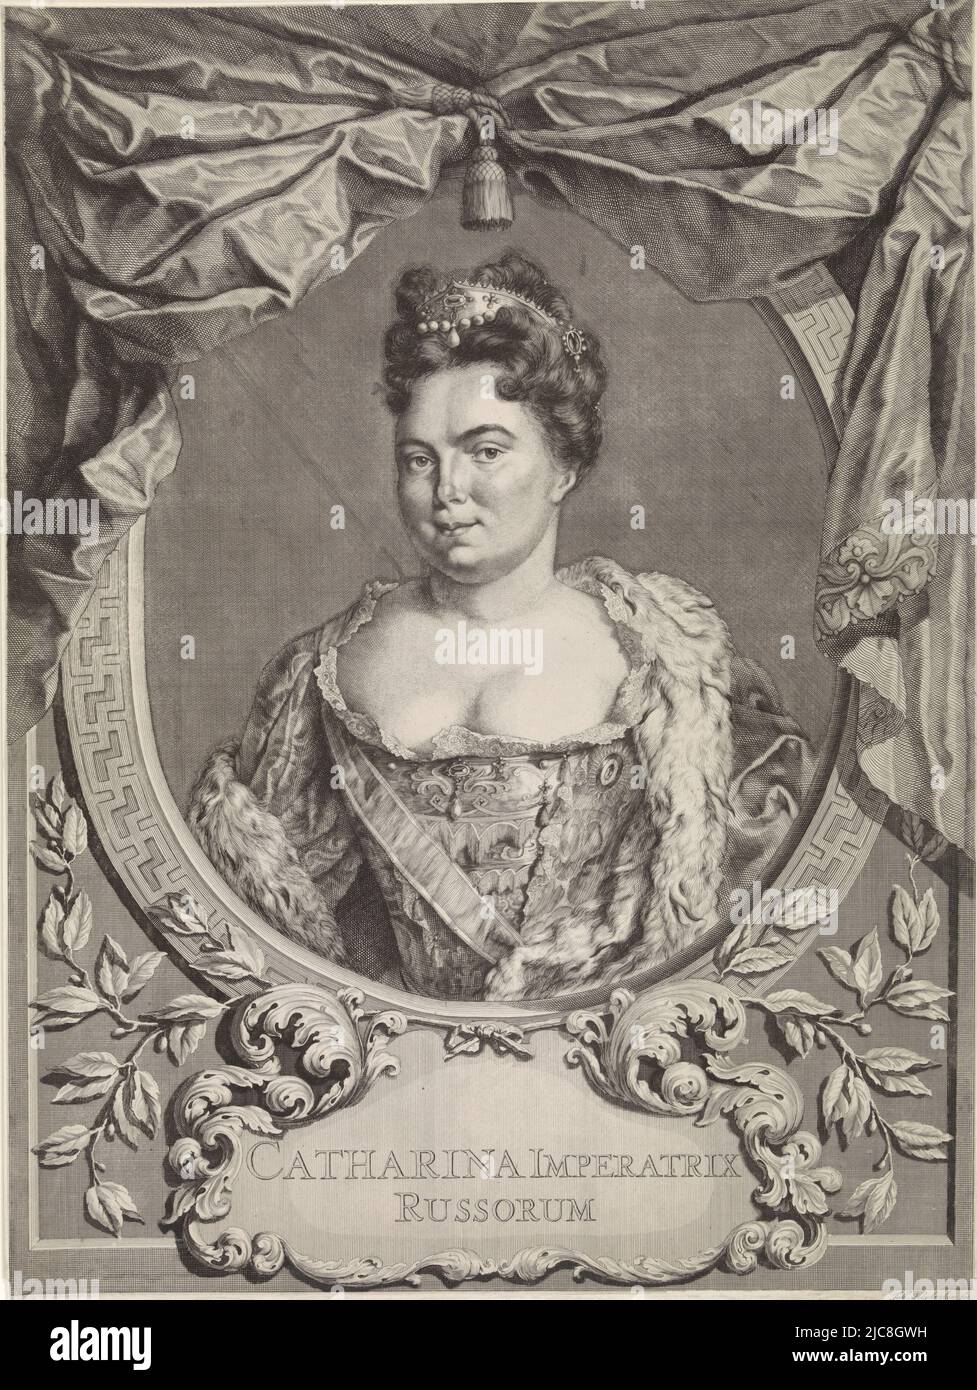 Portrait of Catherine I, Empress of Russia, print maker: Jacob Houbraken, (mentioned on object), Amsterdam, 1725 - 1780, paper, etching, engraving, h 539 mm × w 405 mm Stock Photo